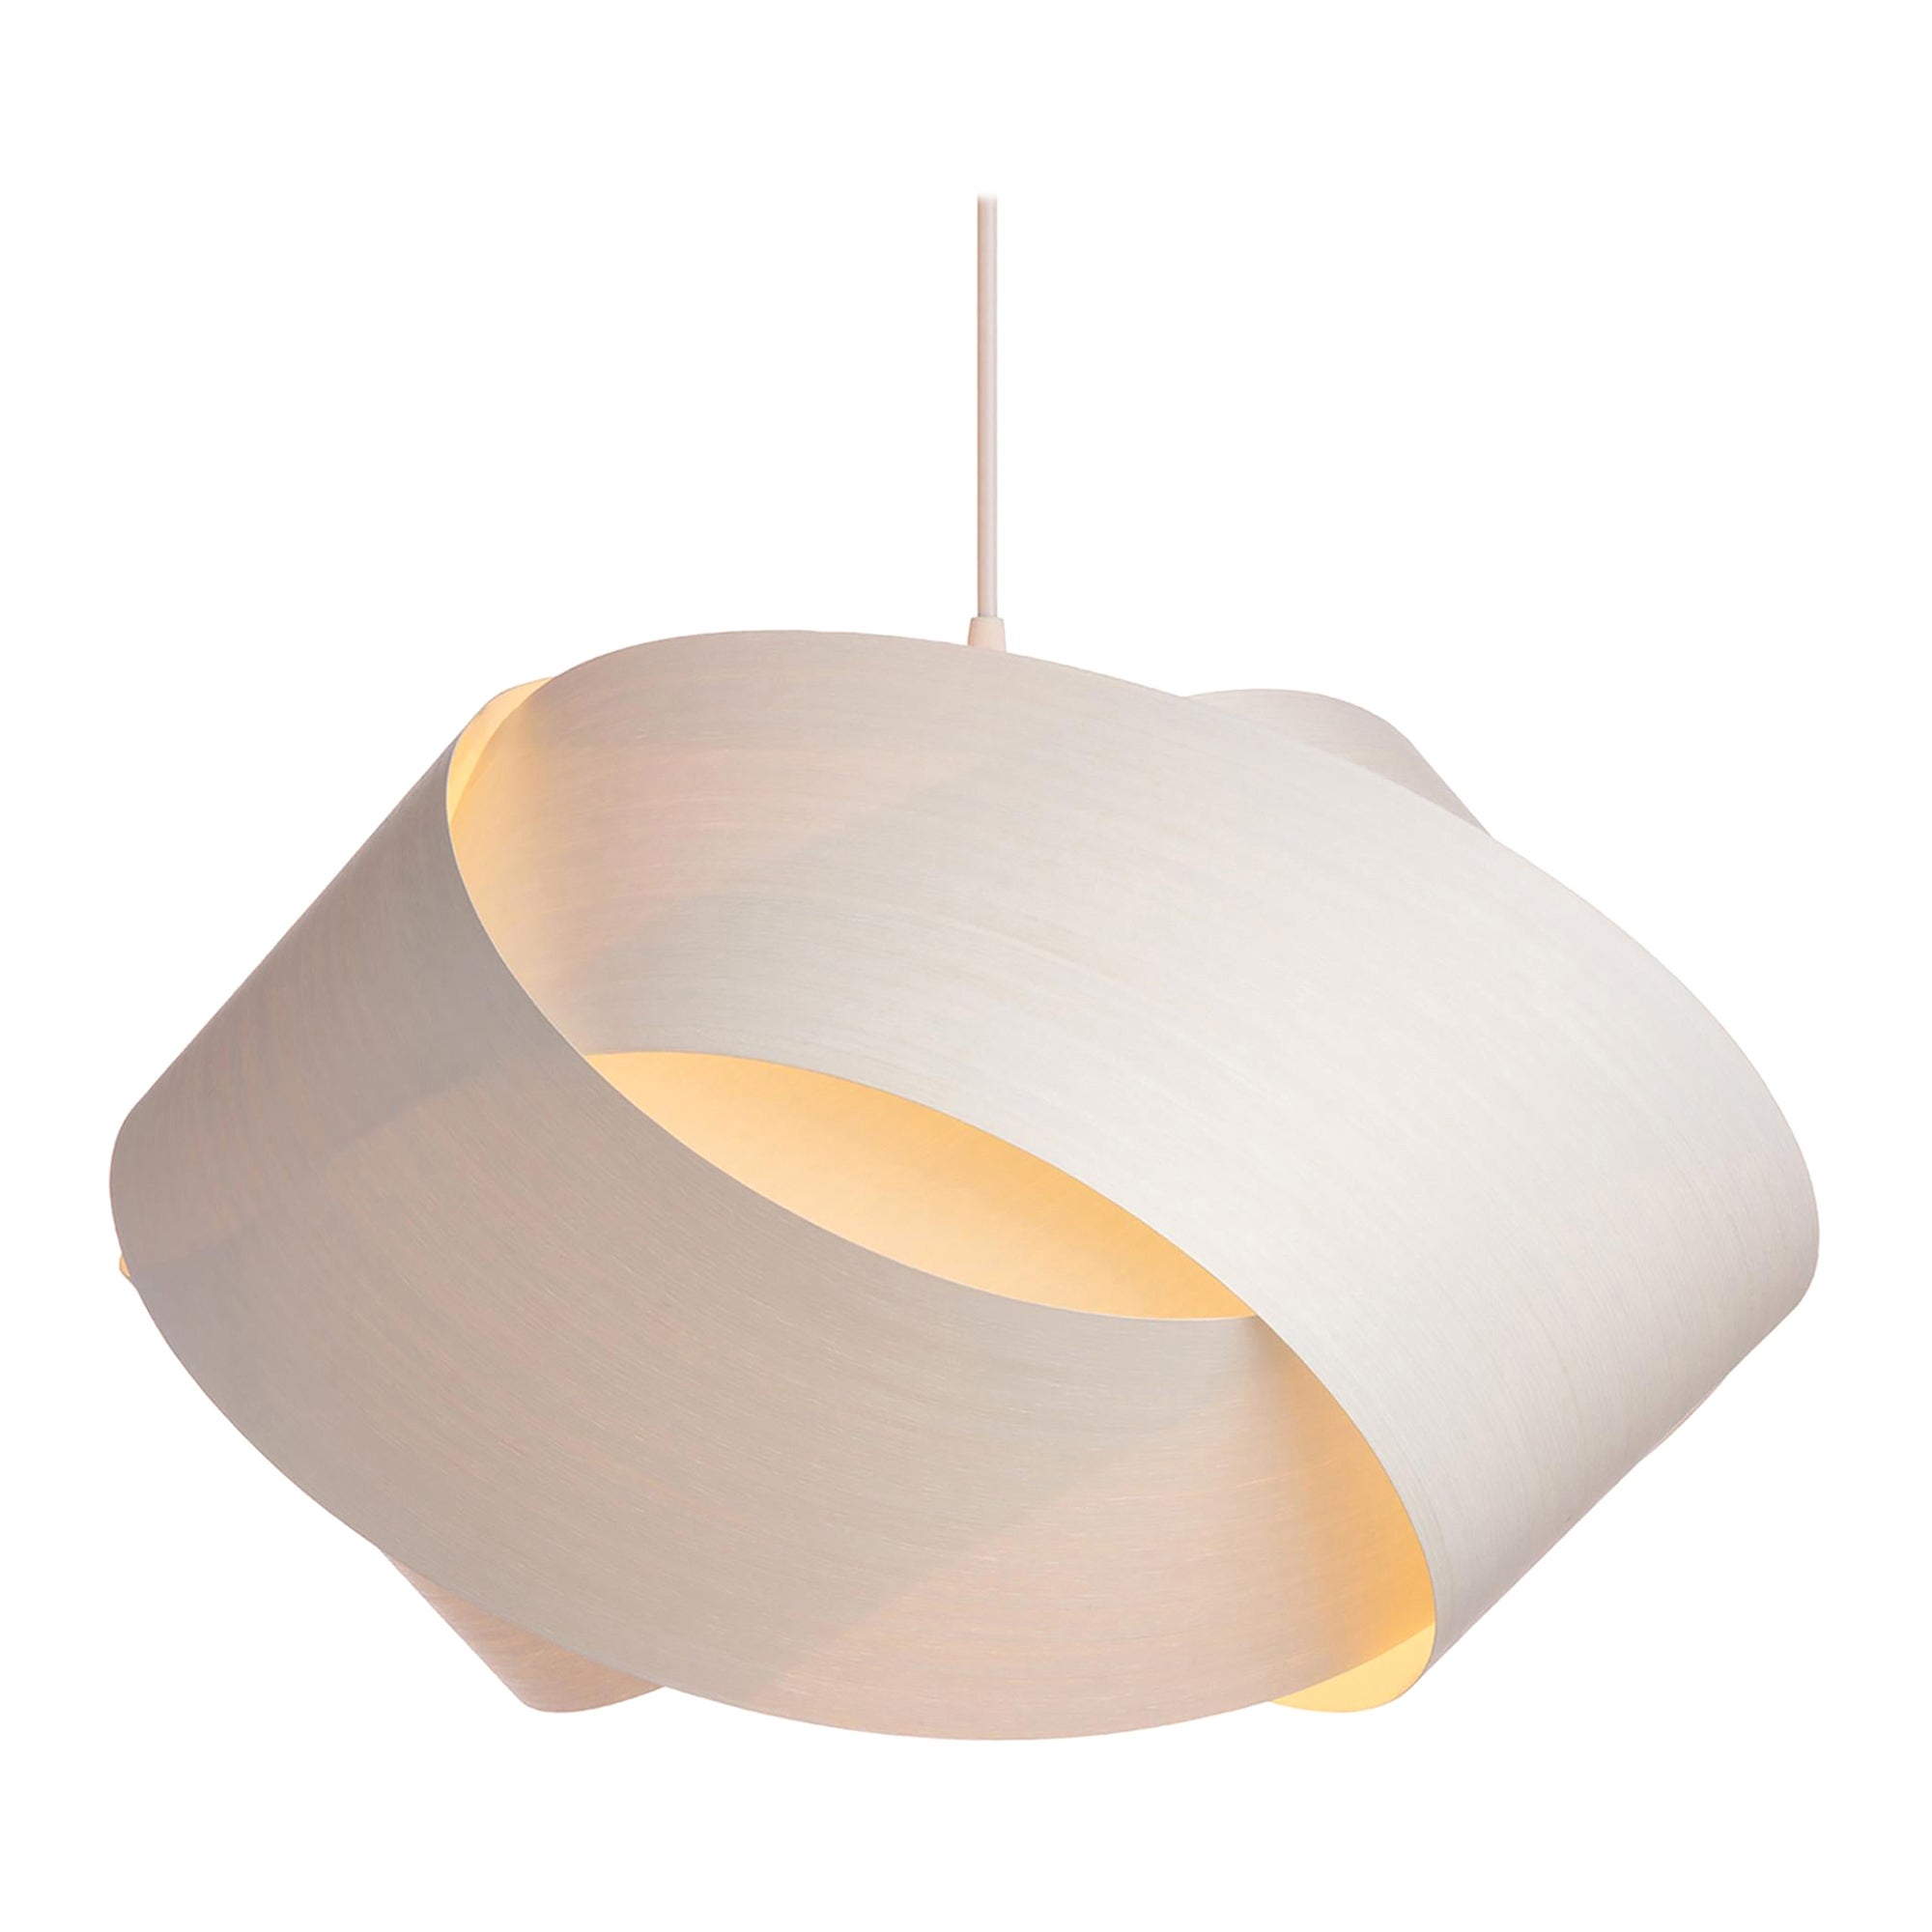 SERENE is a contemporary, Mid-Century Modern light fixture with a Scandinavian Design and Organic Modern composition. This is a Minimalist luxury wood veneer pendant design and can be exhibited in annexes, entrance ways, and offices. White Eco is a